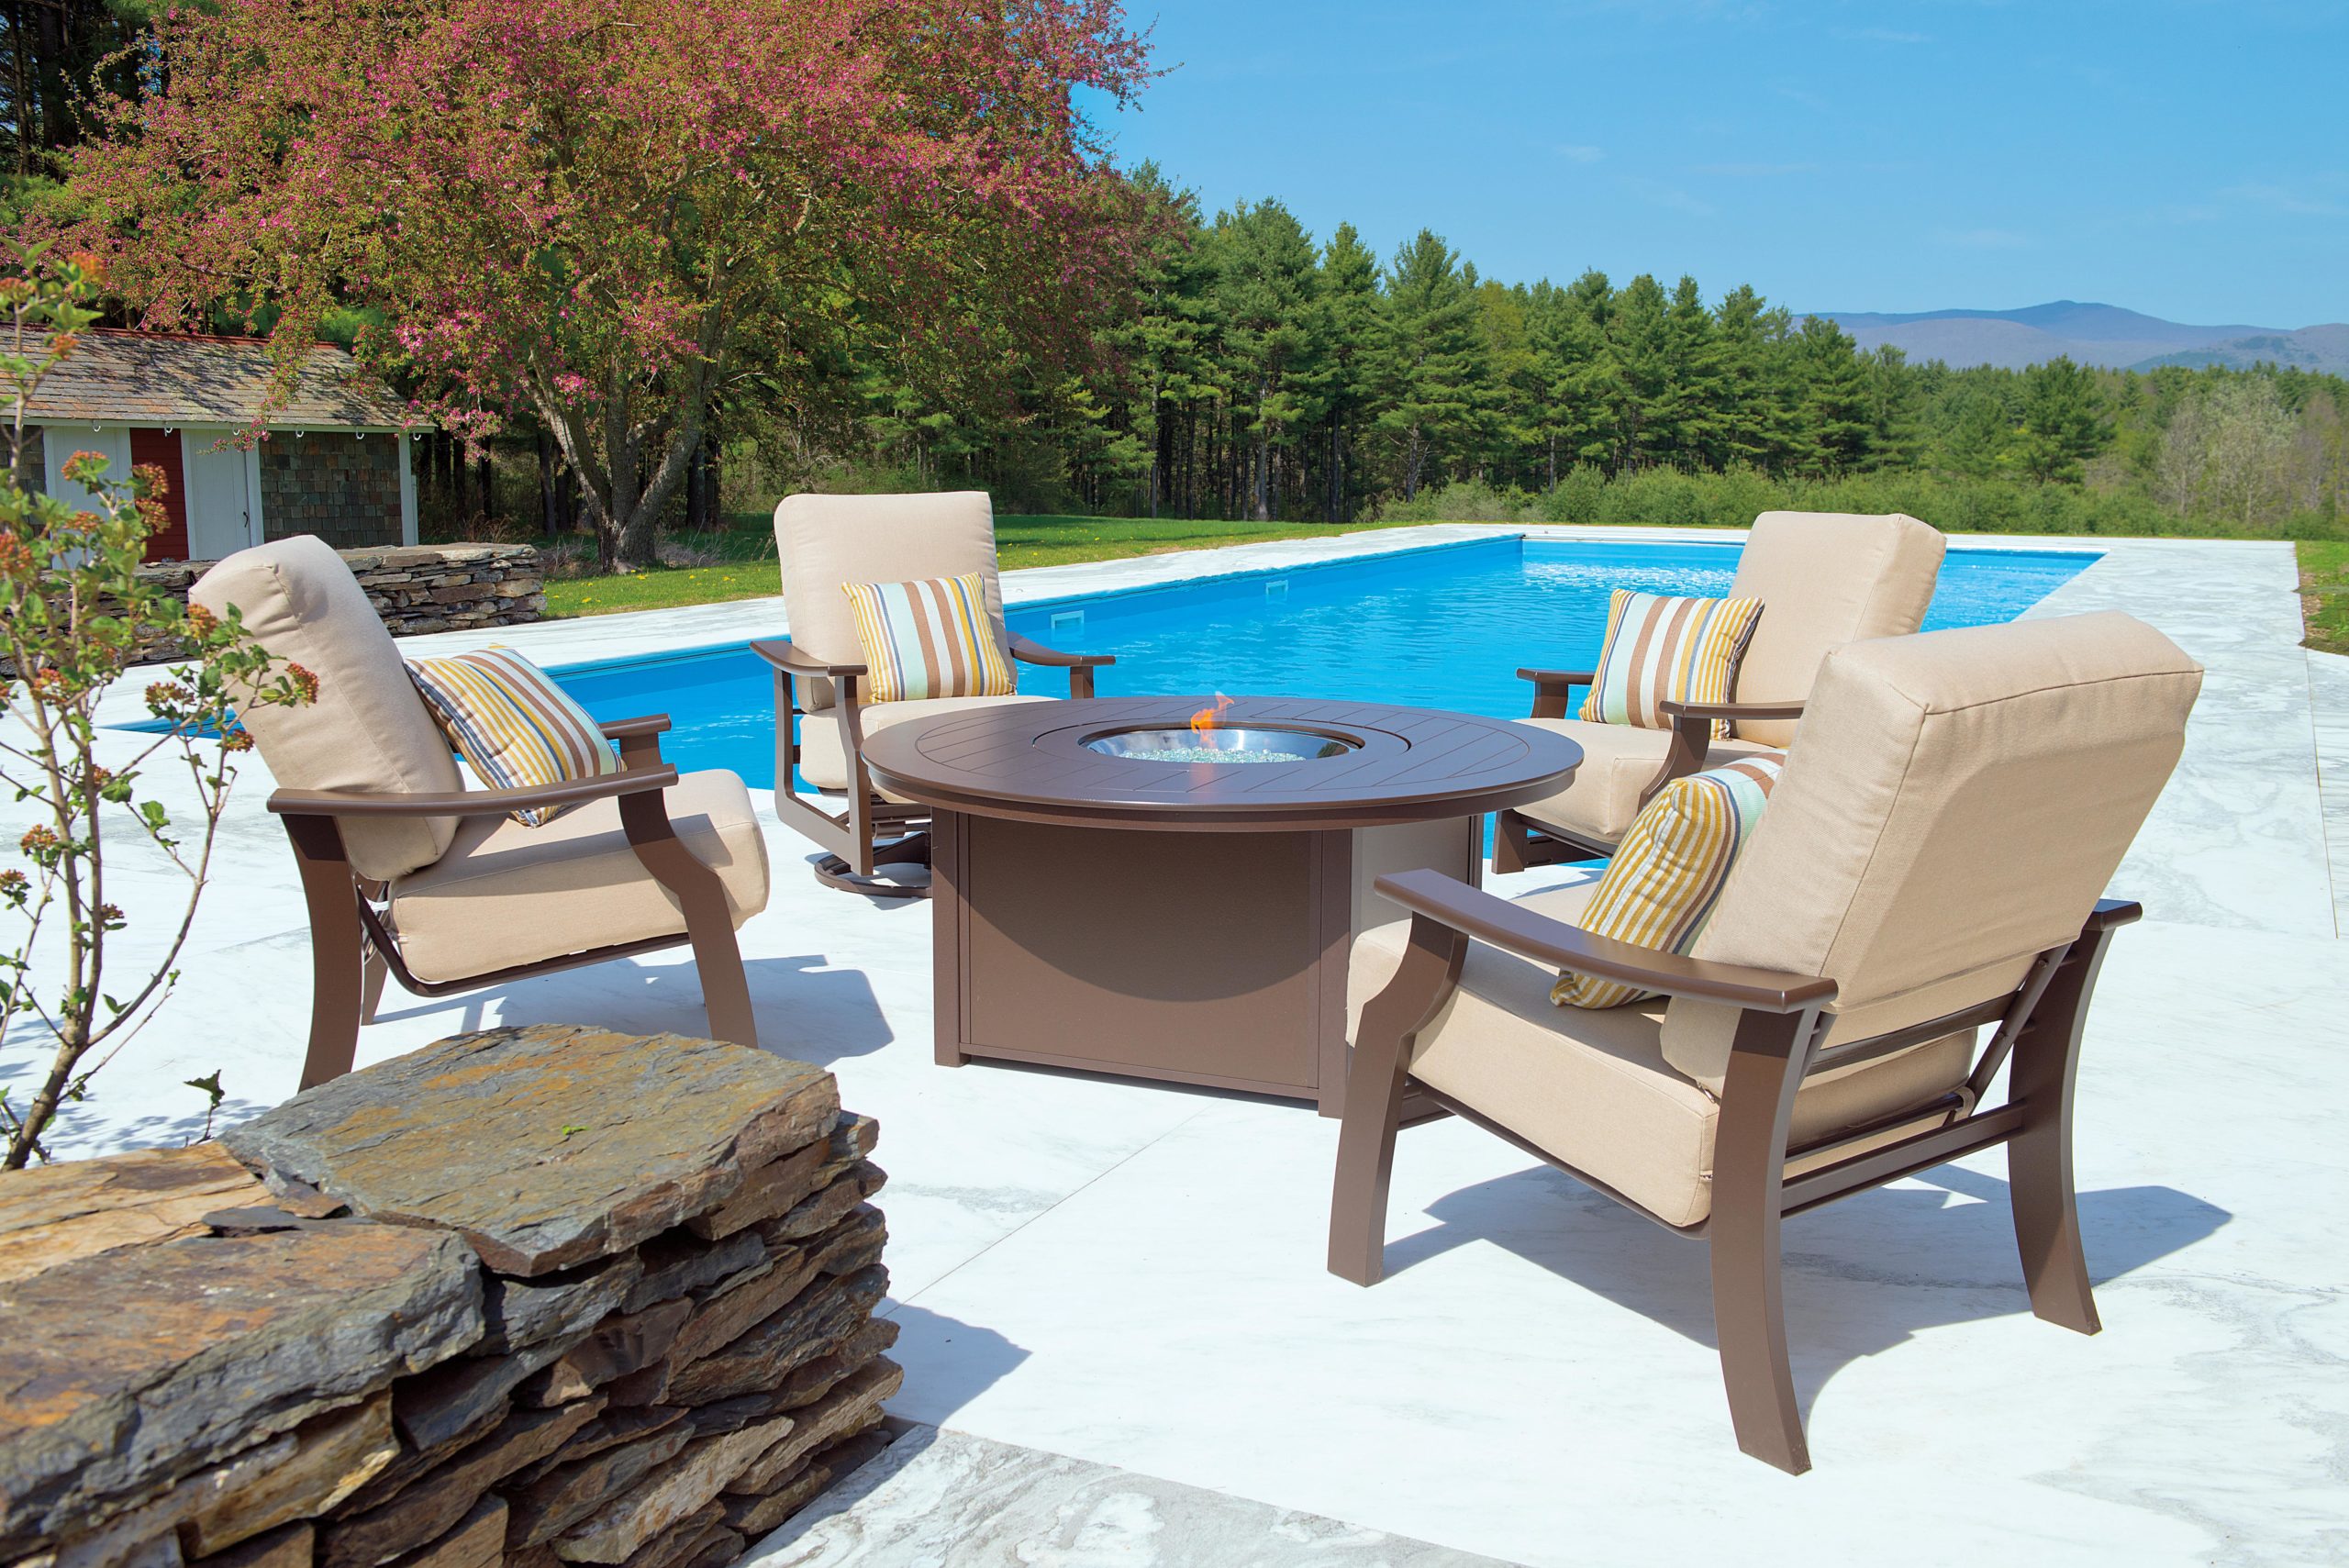 What Kind of Patio Furniture Will Look Best with My Pool? - Fronheiser ...